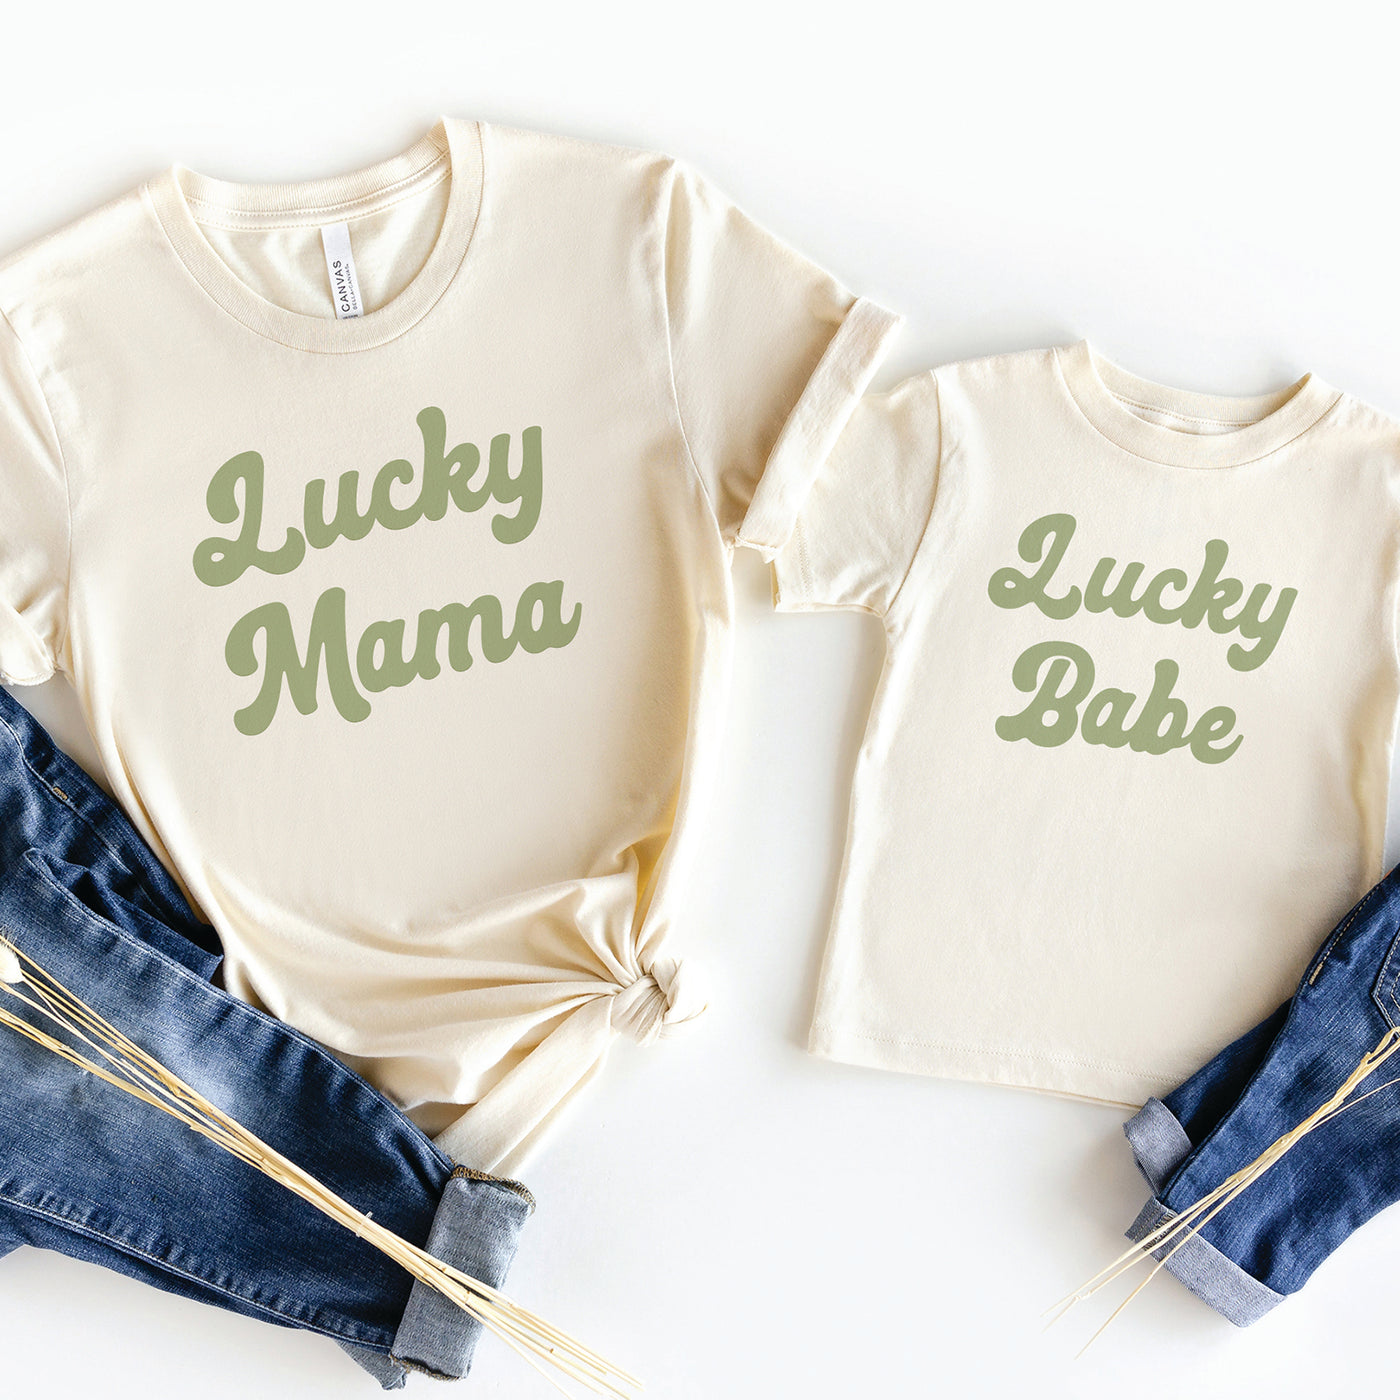 matching mommy and me st patricks day shirts green lucky mama and lucky babe print on natural white tshirts